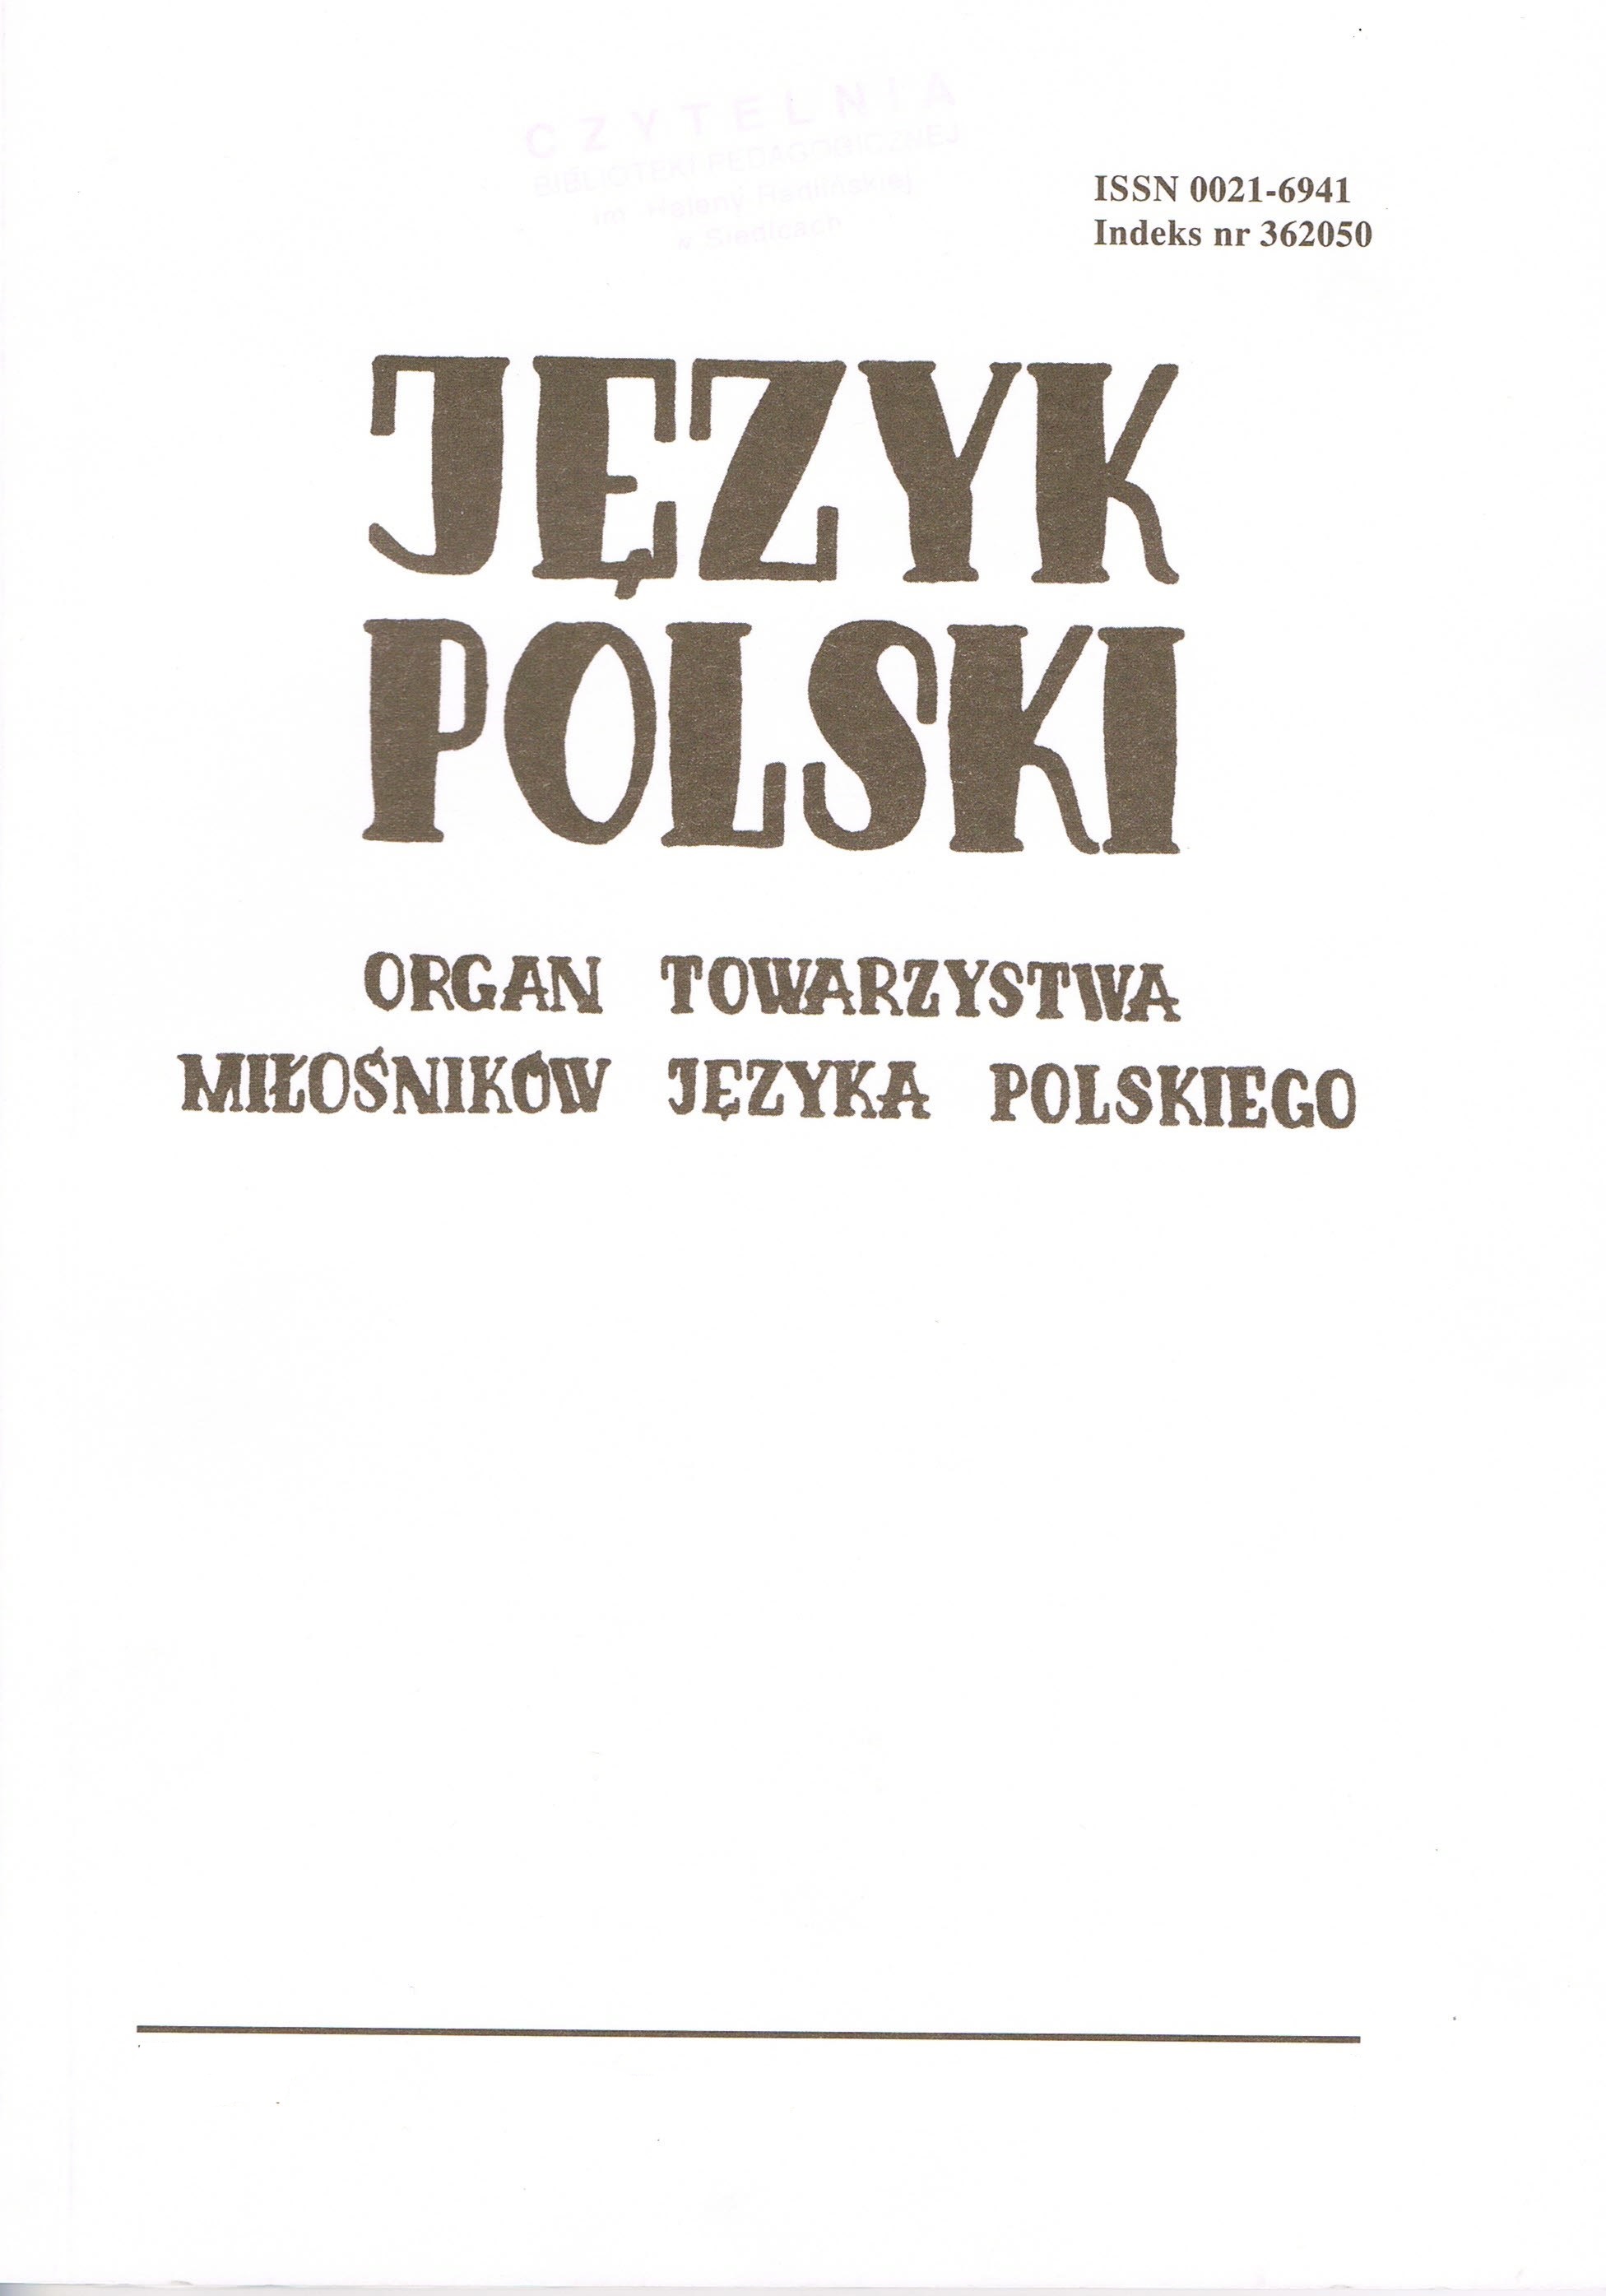 The "Illustrated Dictionary of Polish Language" by M. Arct as a work of popular science from the first half of the 20th century  Cover Image